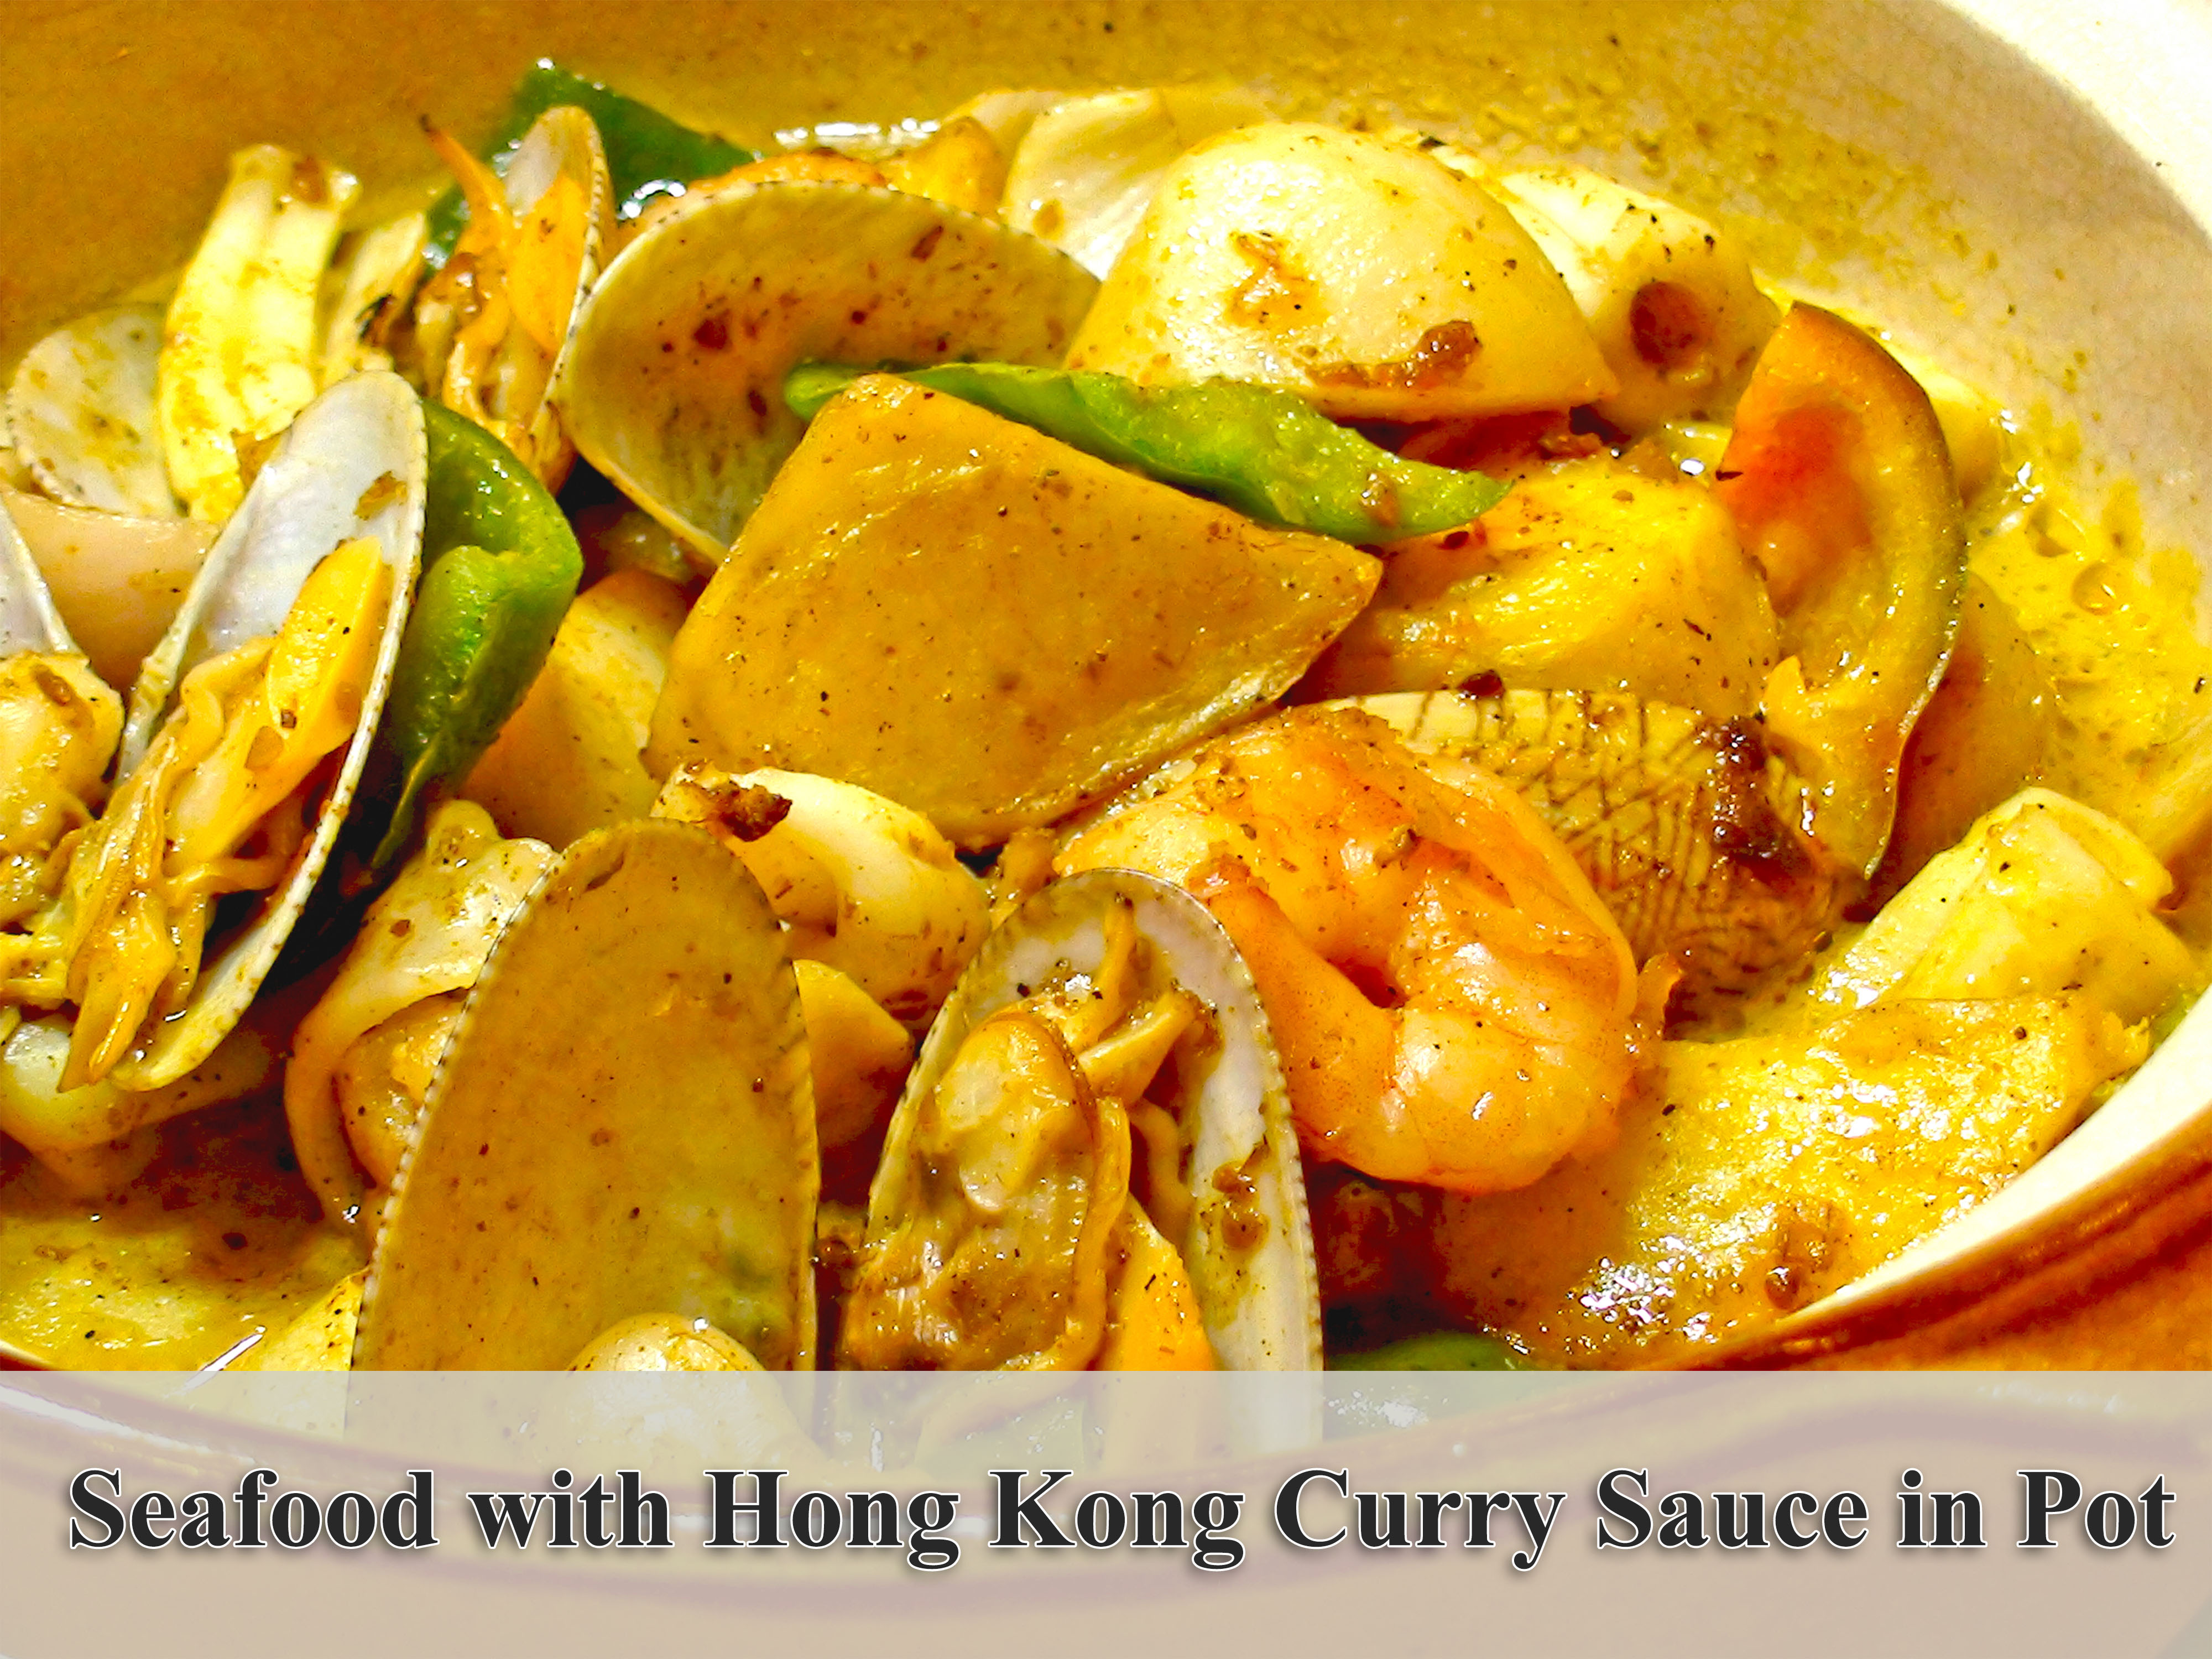 Seafood with Hong Kong Curry Sauce in Pot